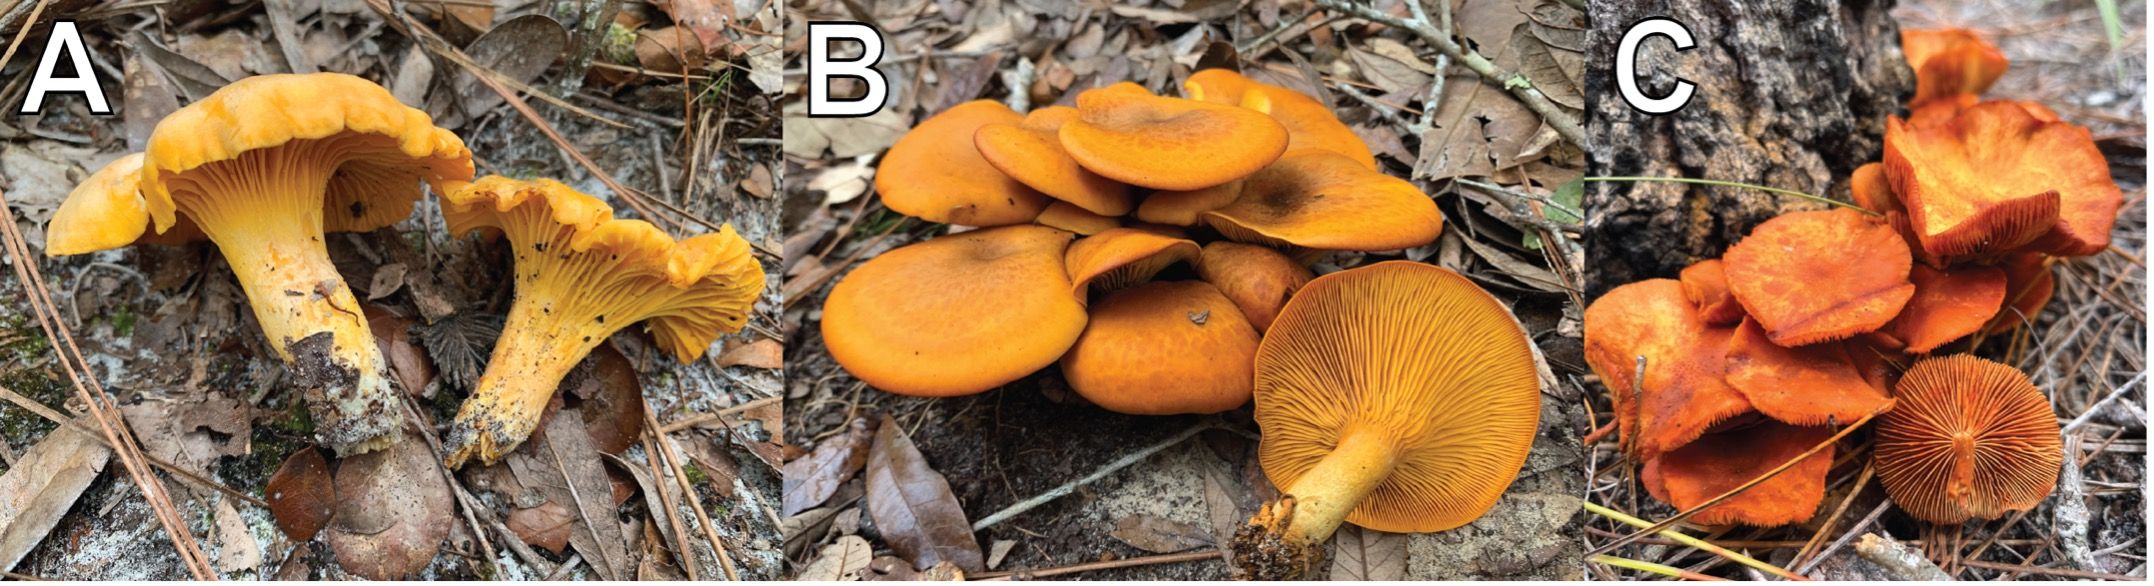 A comparison between a common Cantharellus species and two common look-alike mushrooms that occur in Florida: (A) Cantharellus tenuithrix; (B) Omphalotus subilludens; (C) an unidentified Gymnopilus species. 